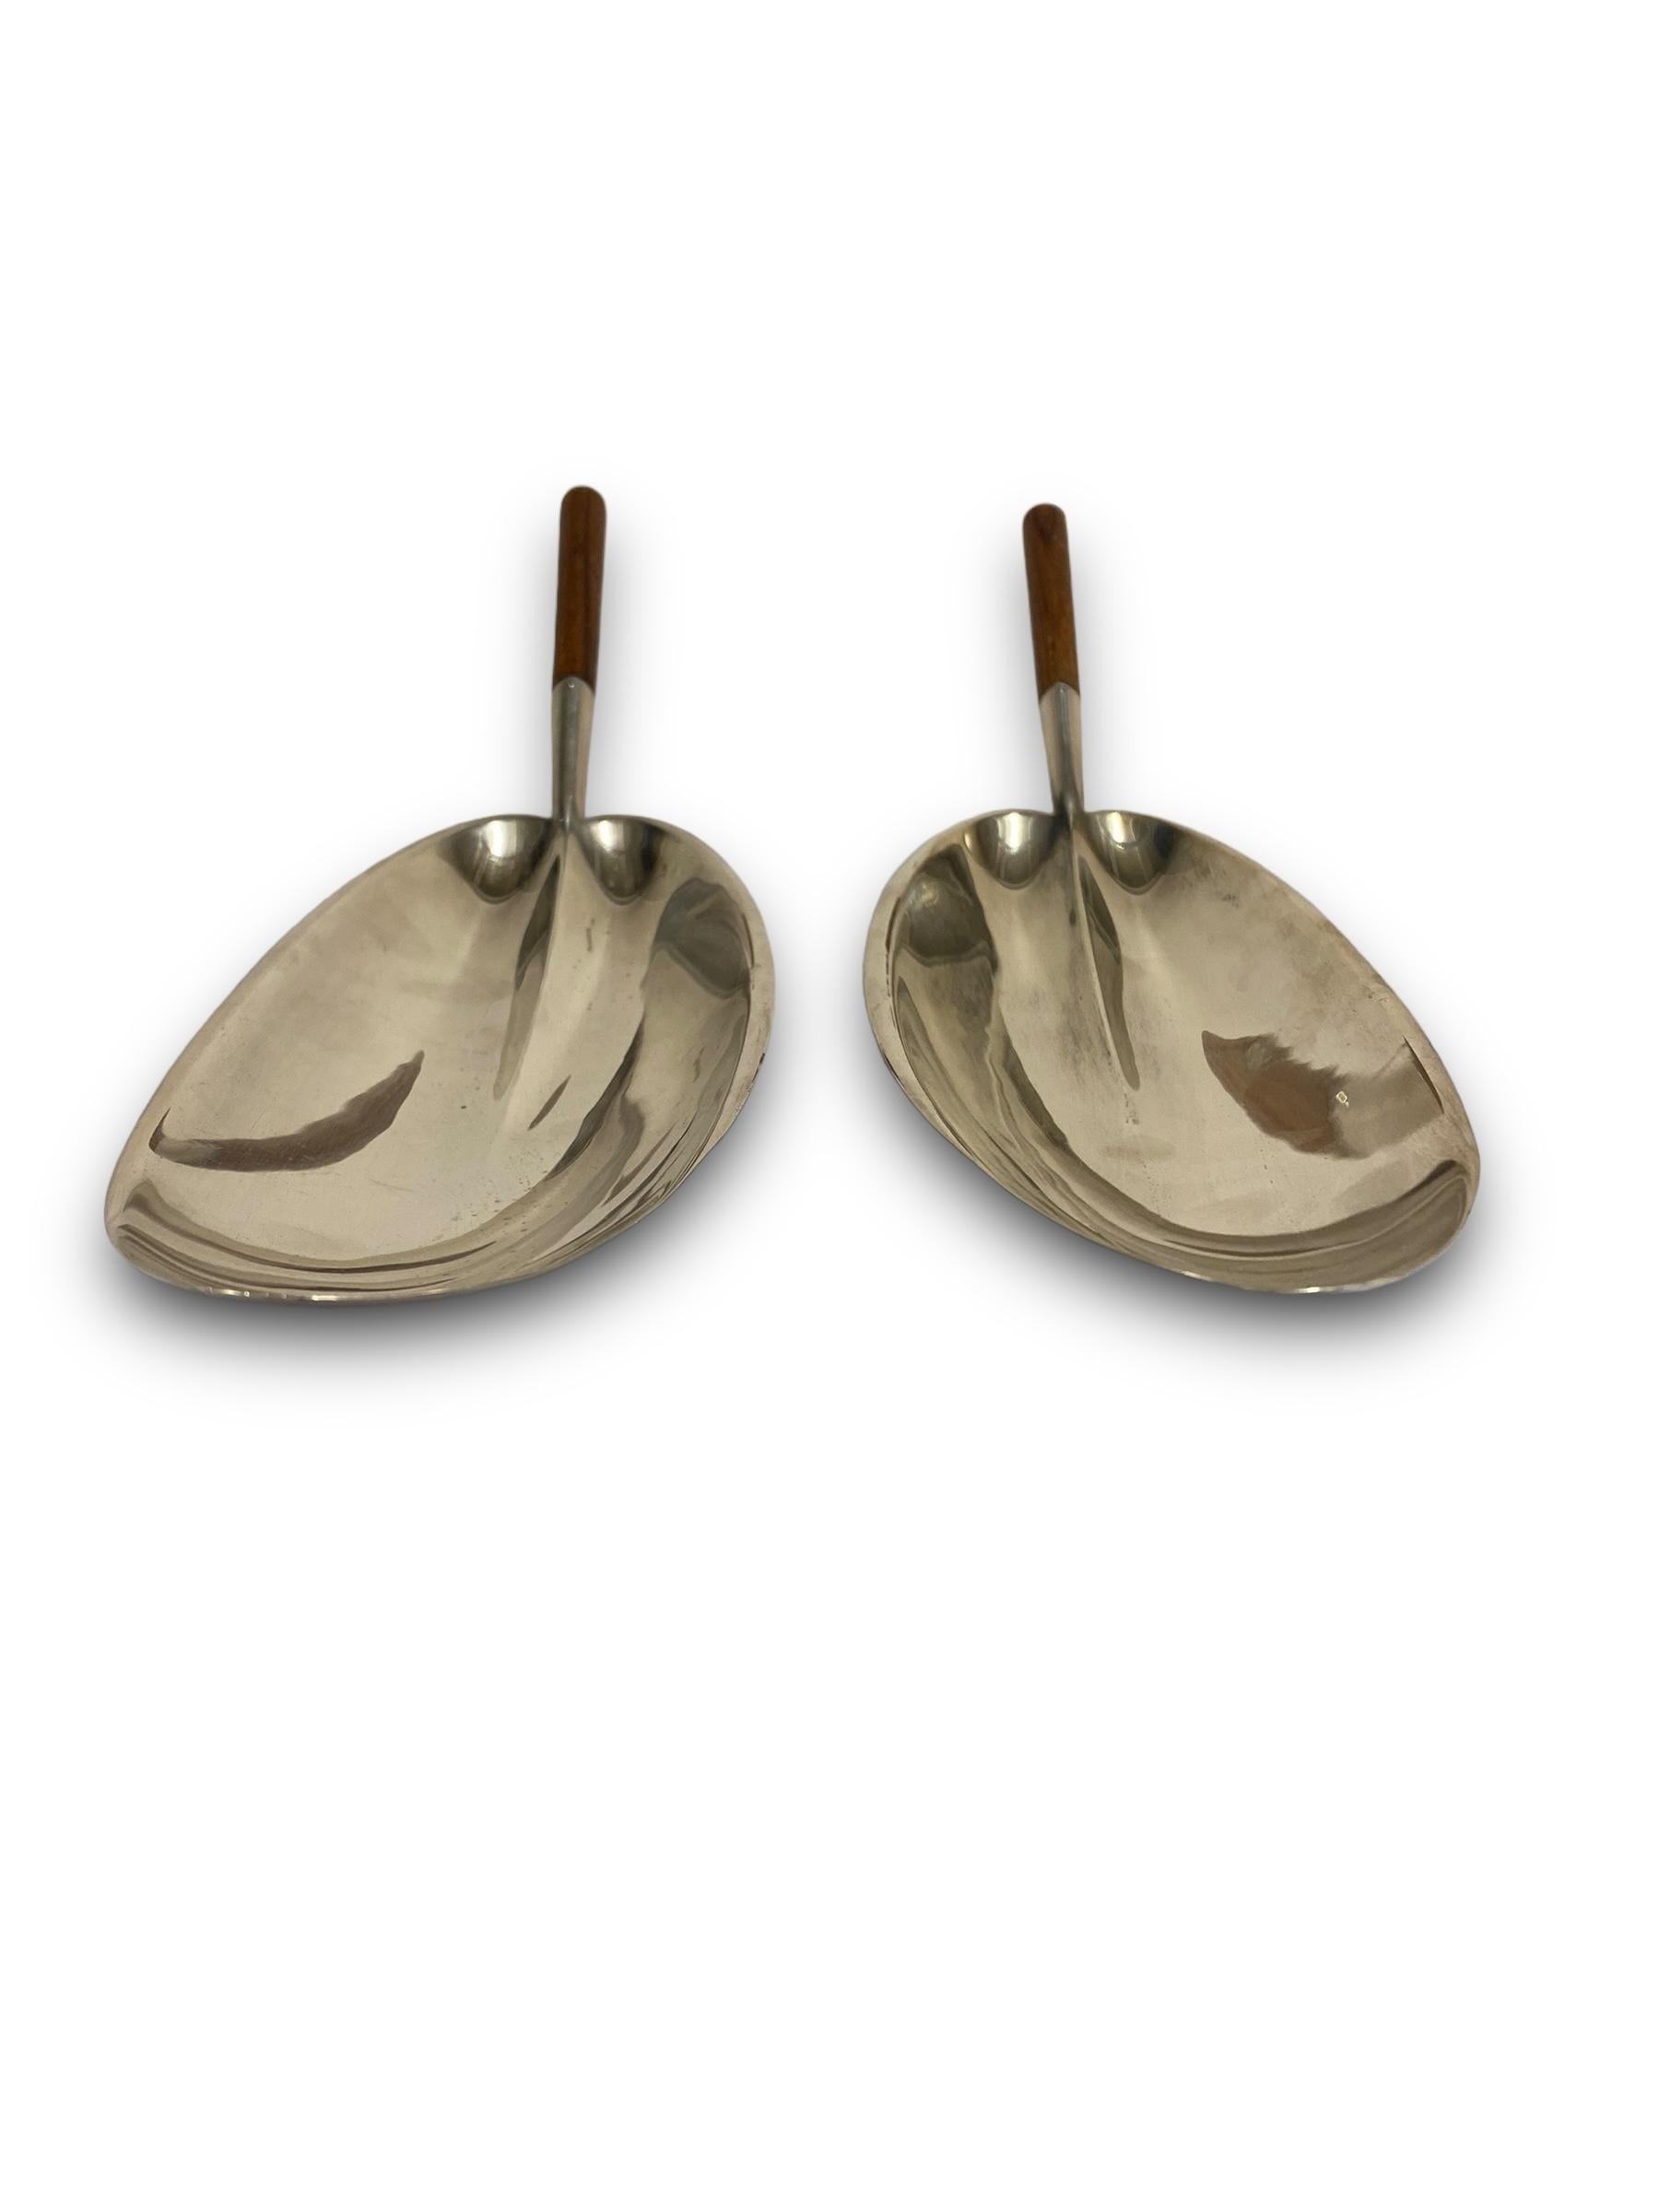 A Pair of Tapio Wirkkala, Serving Bowls In Silver & Teak, TW-85, 1960s For Sale 1